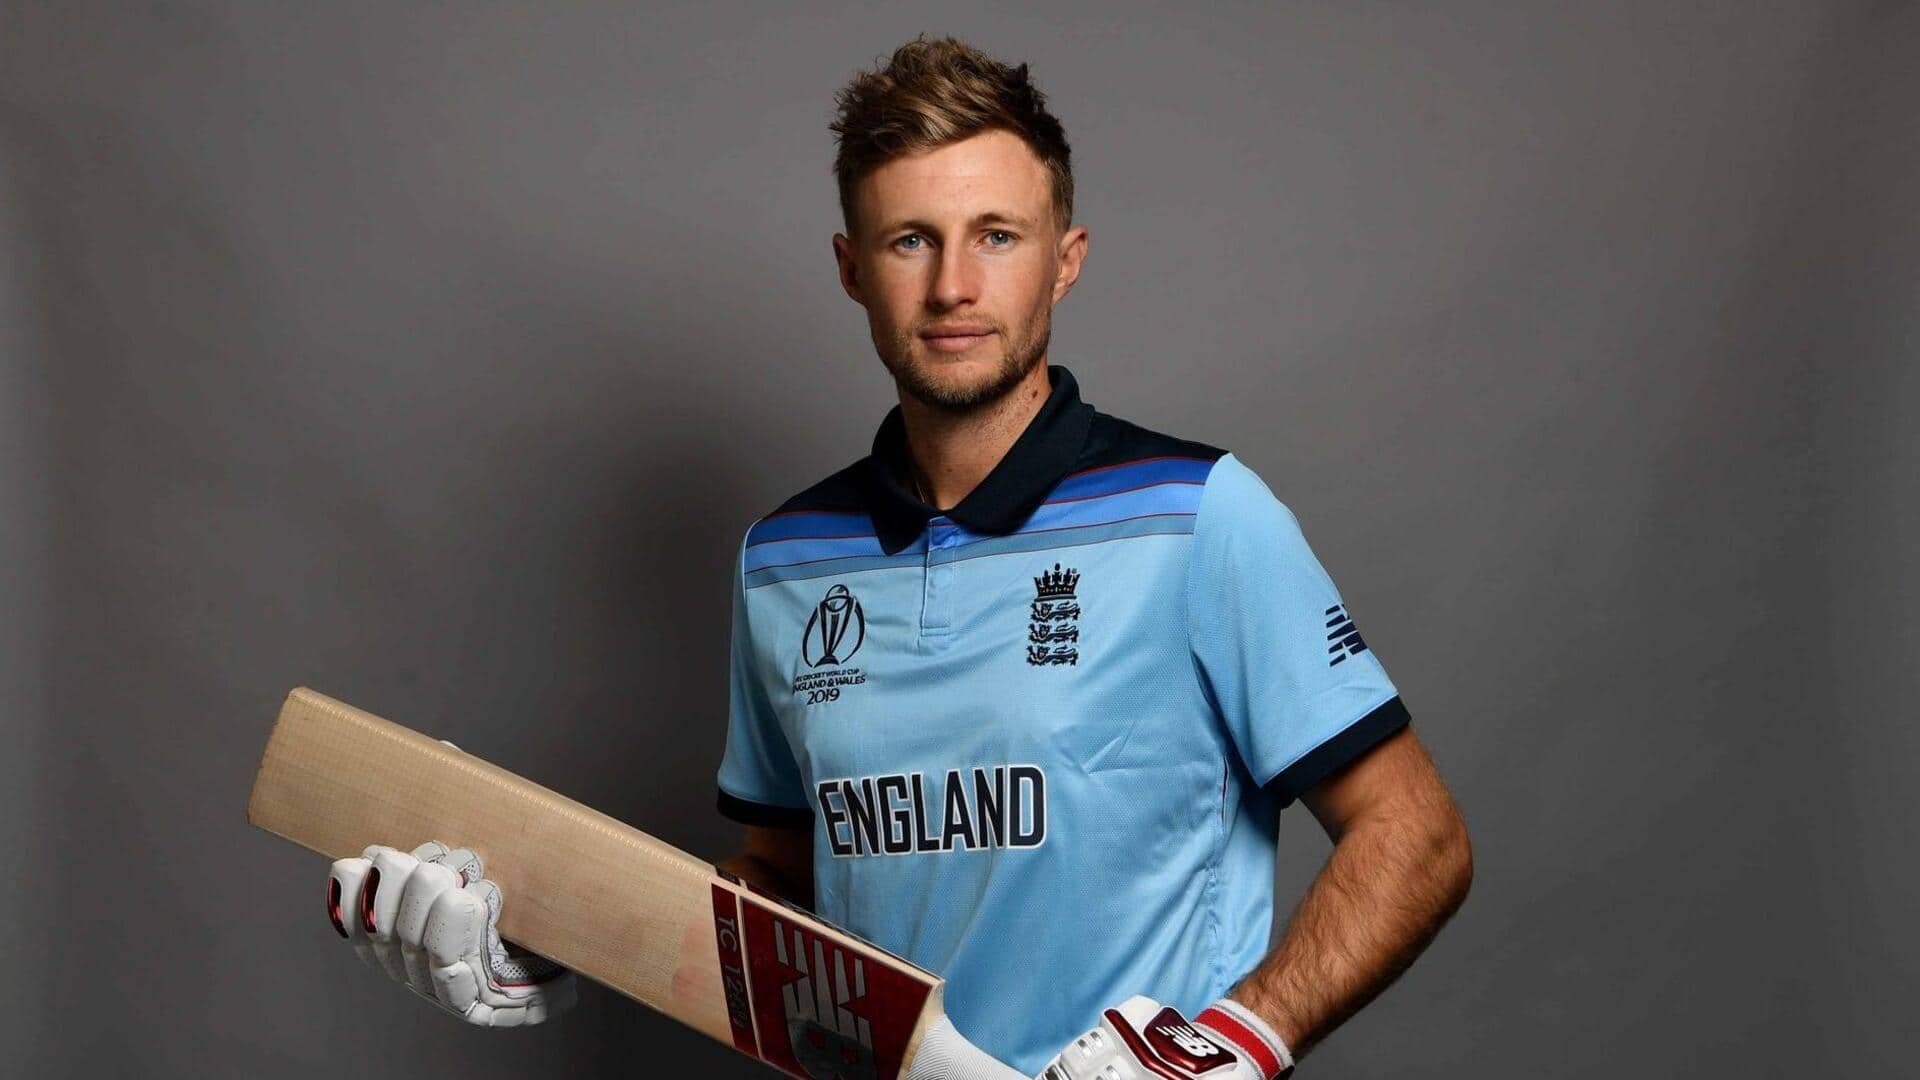 ICC World Cup, Joe Root can slam these records: Details